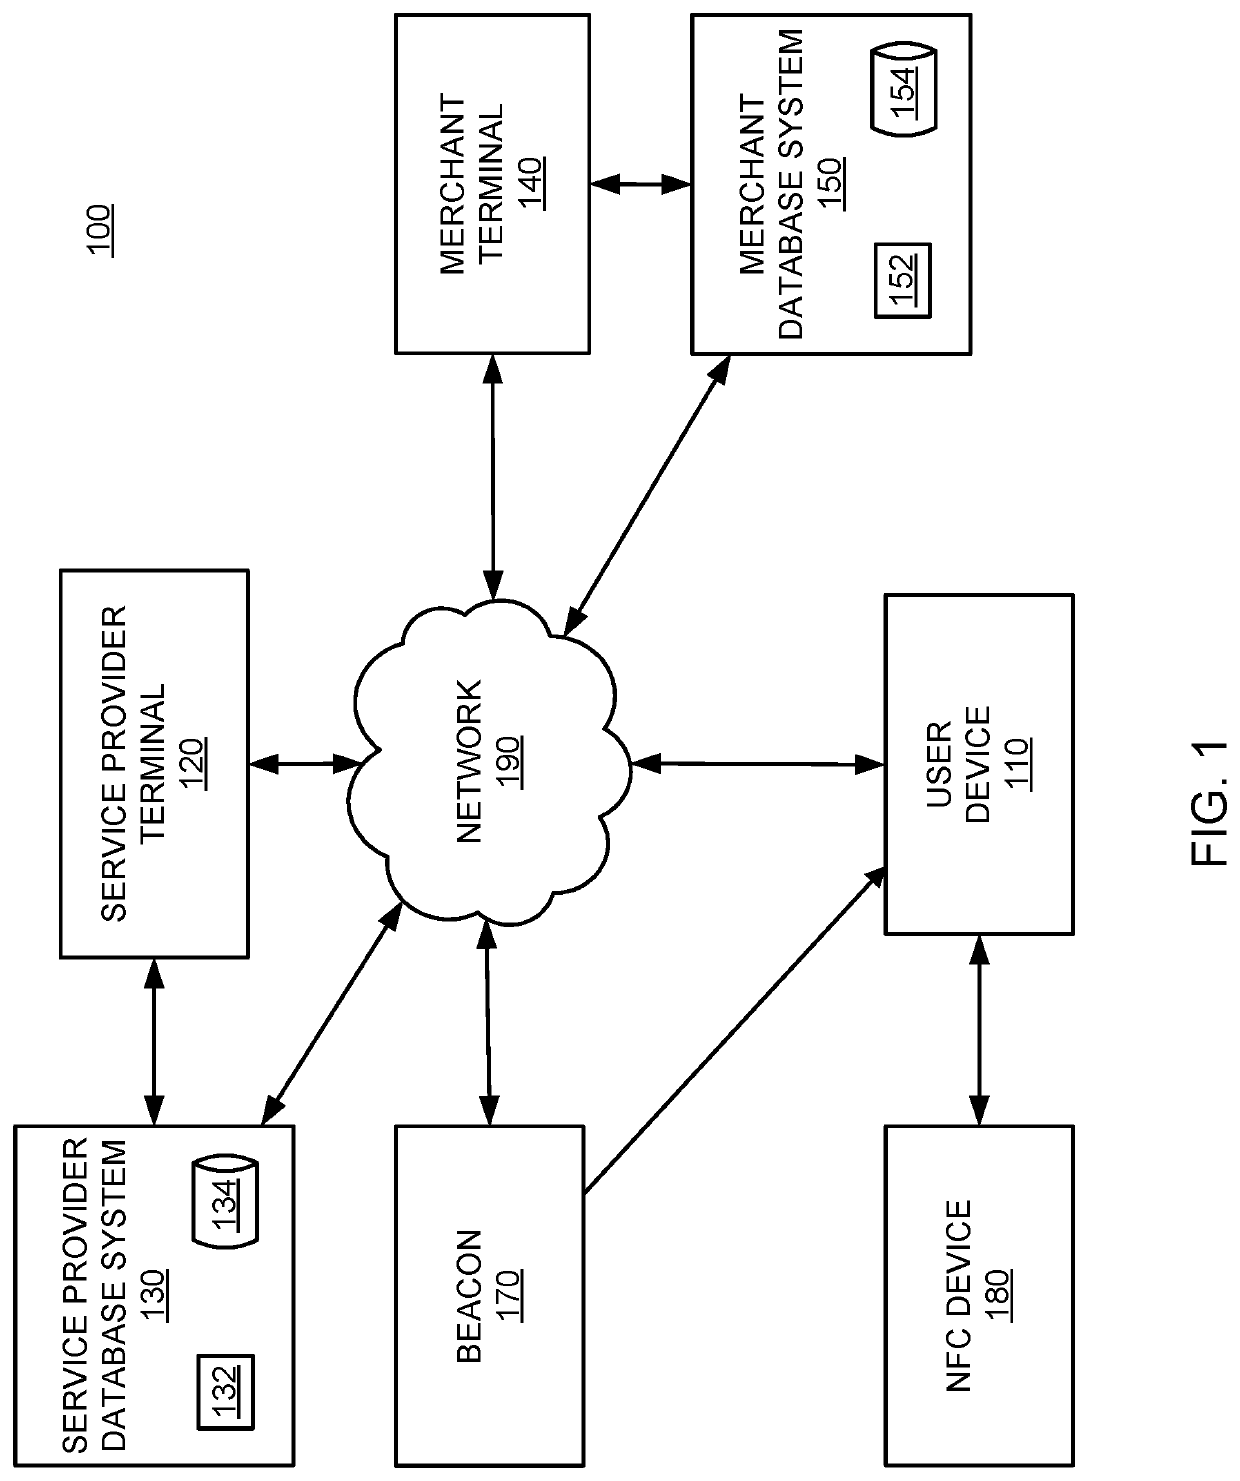 Beacon-triggered activation of a near field communication application